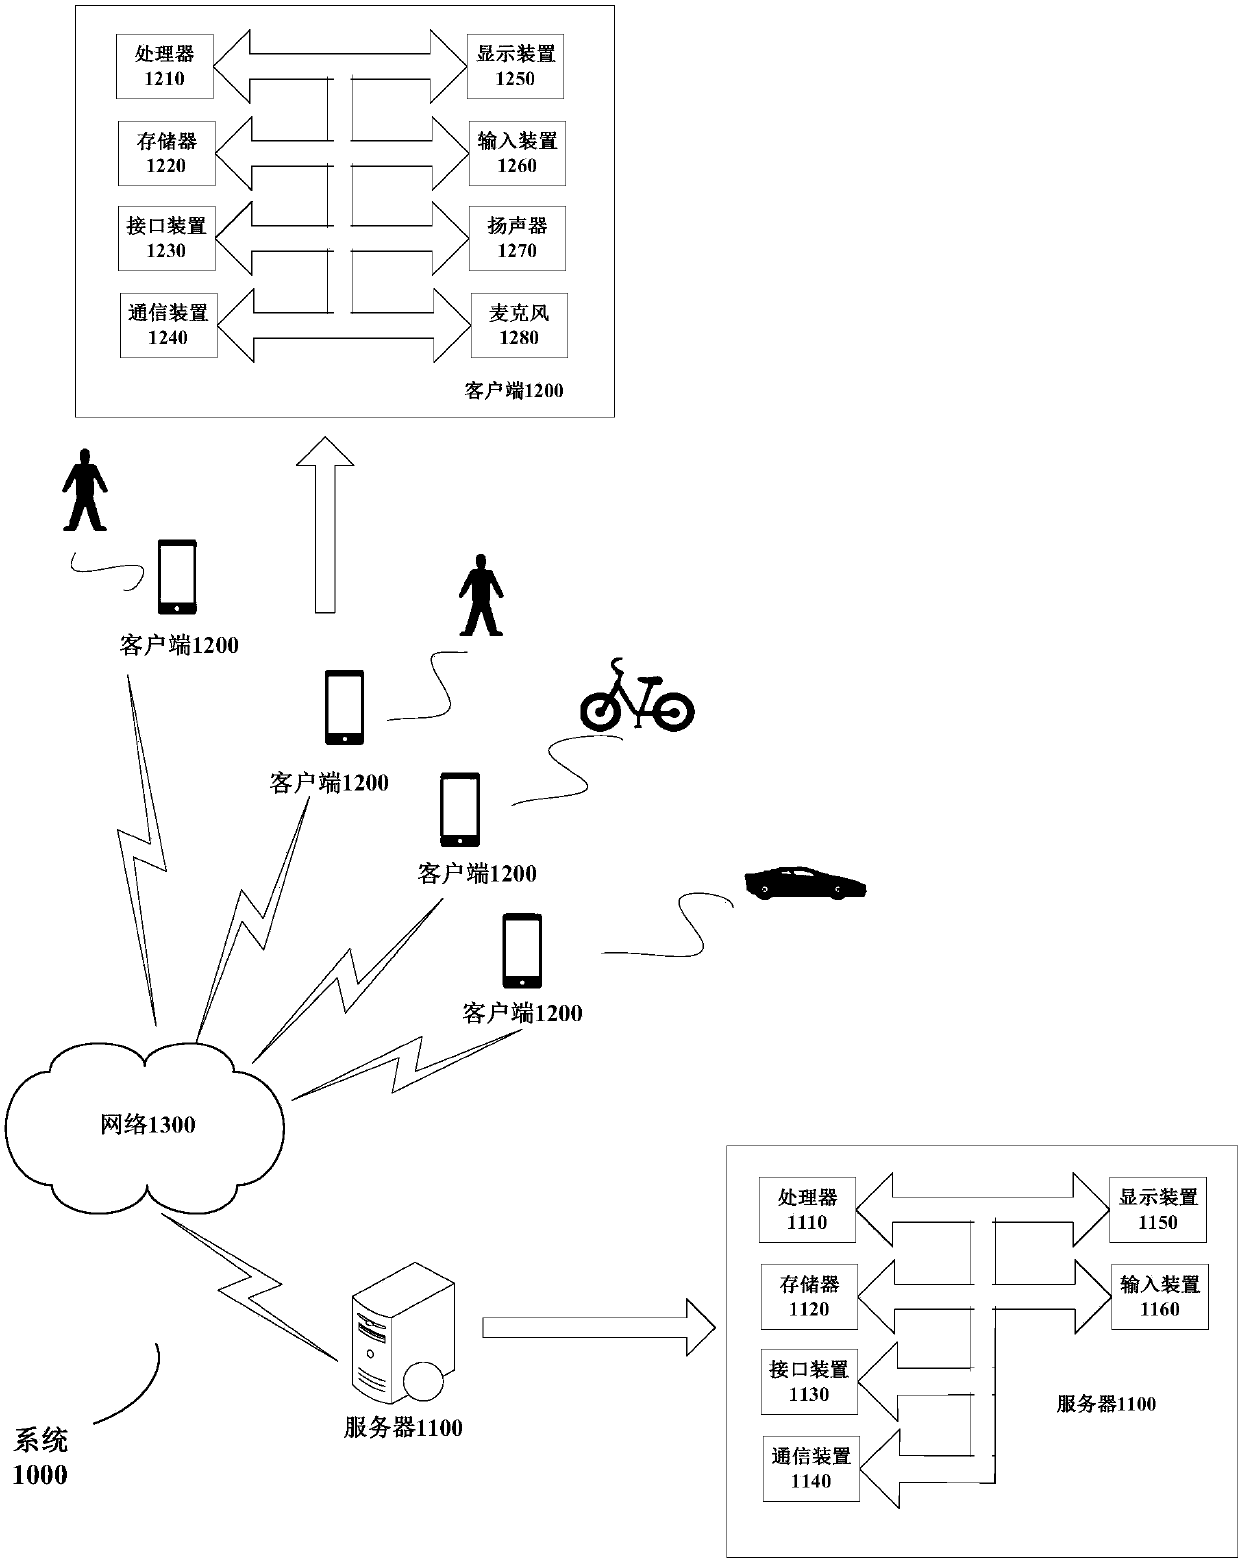 Car sharing route providing method, client side, server and car sharing system